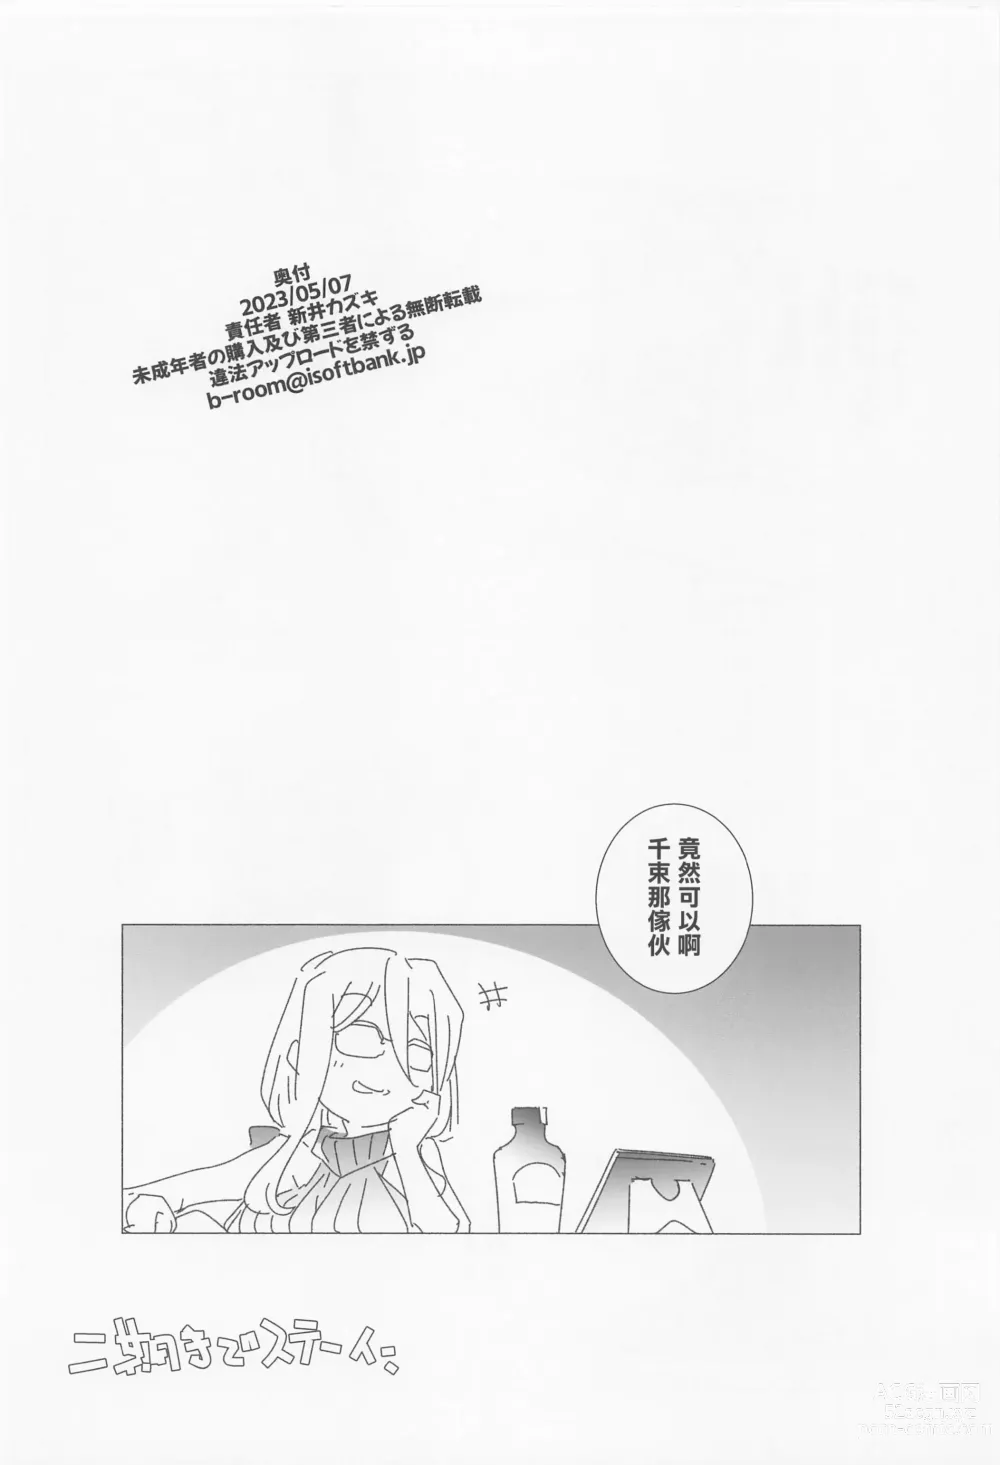 Page 17 of doujinshi INTER MISSION